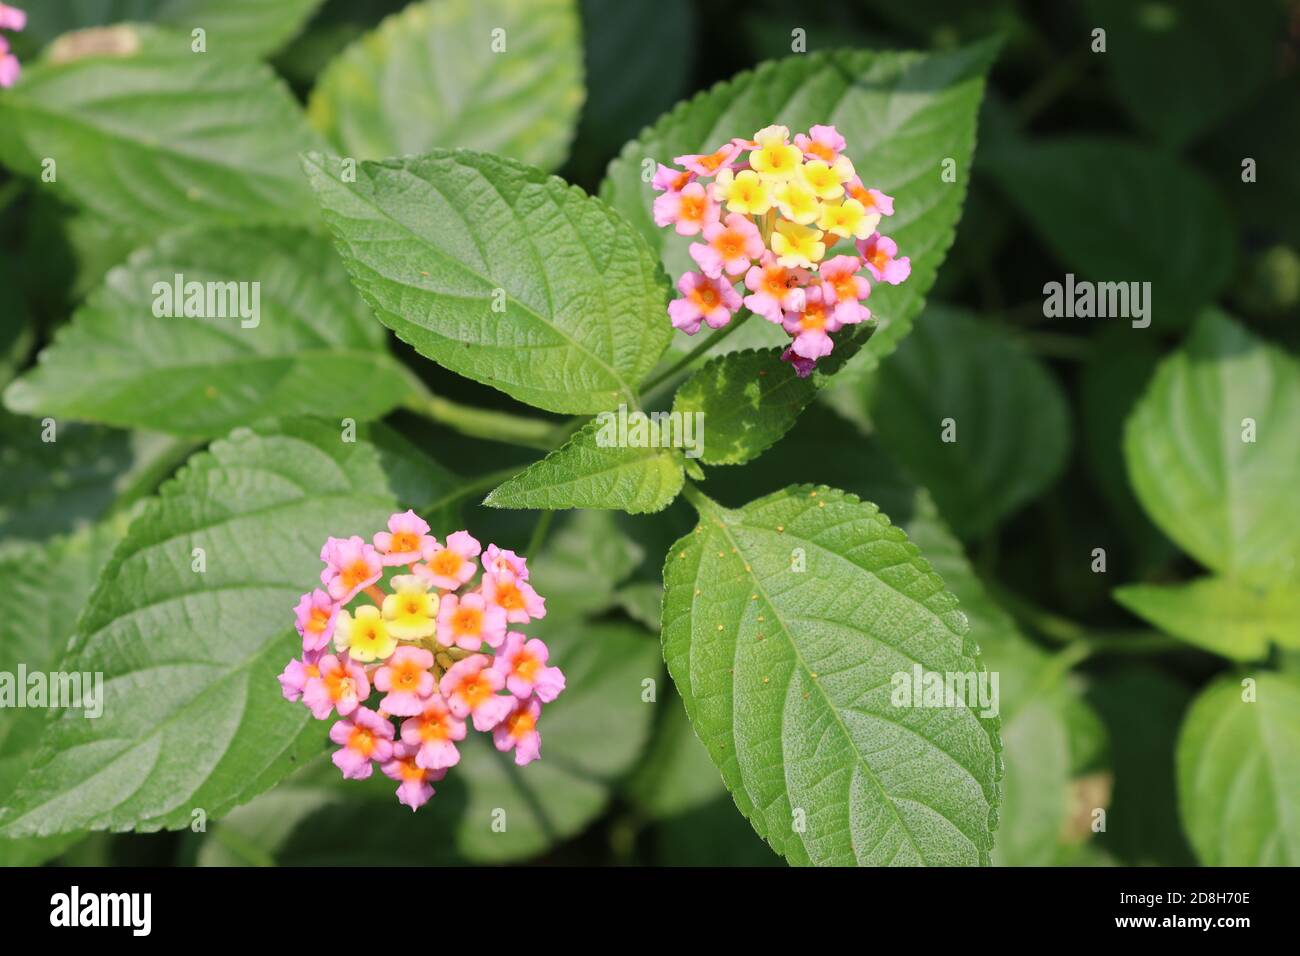 These small flowers commonly grow in the forest but cannot see any special.  But through the camera lens can understand nature hide something from us  Stock Photo - Alamy